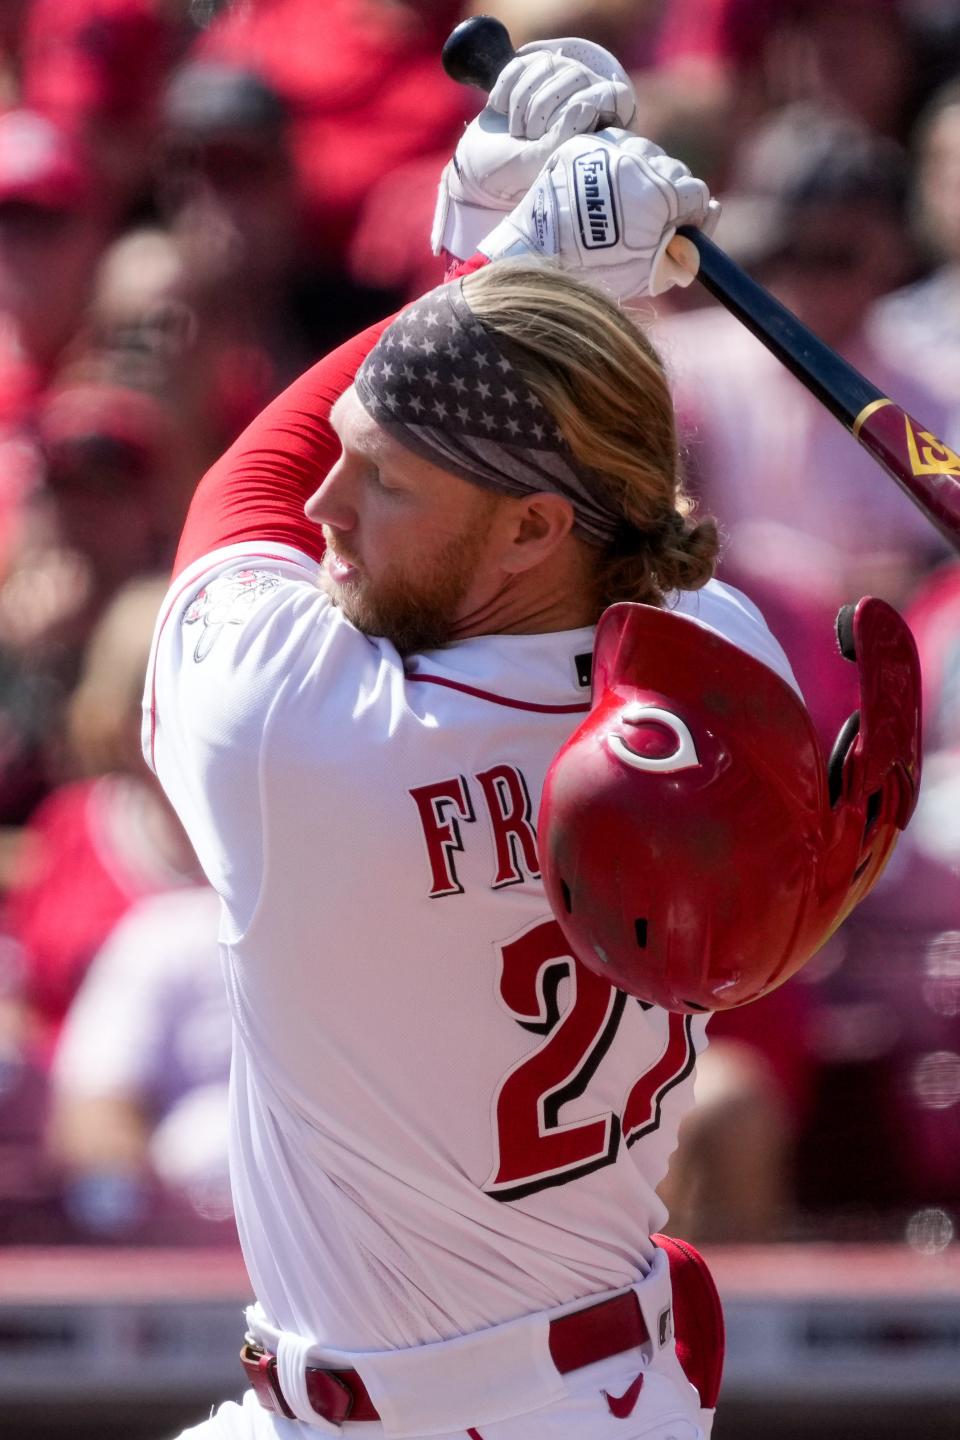 Outfielder Jake Fraley has  27 home runs and a .794 OPS in 179 games since being acquired from the Seattle Mariners.  Fraley avoided arbitration by agreeing to a $2.15 million deal.